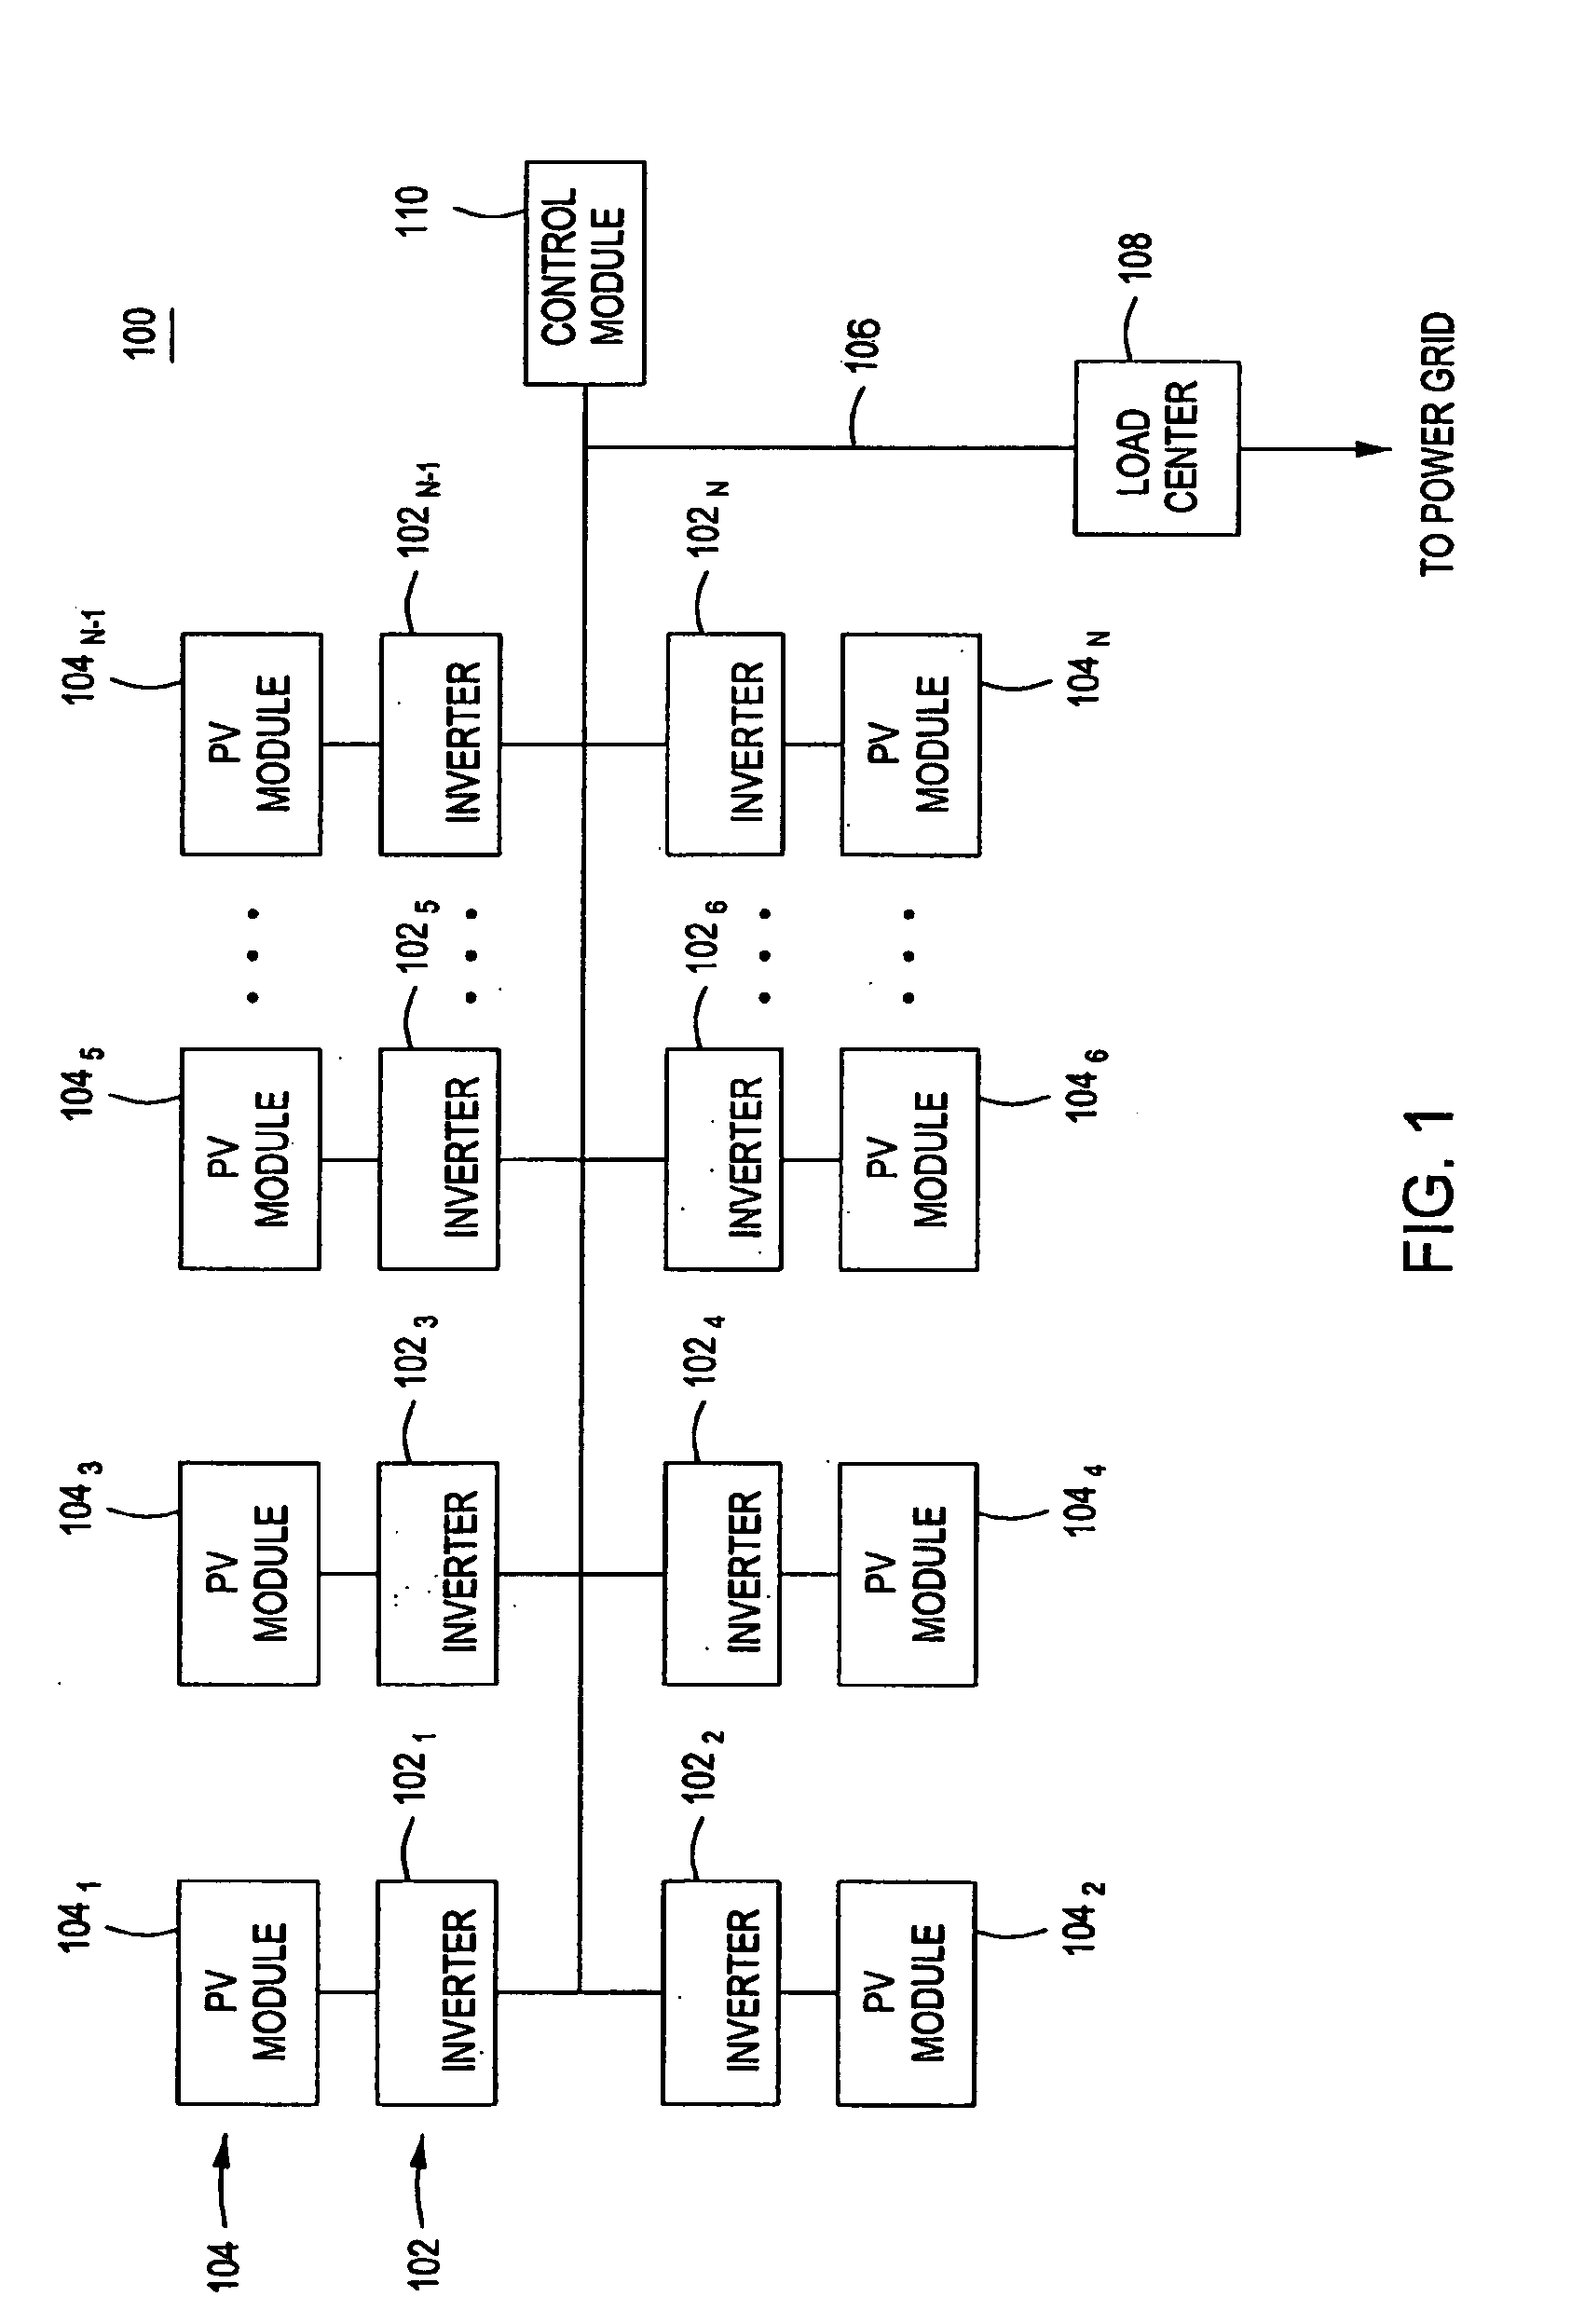 Method and apparatus for maximum power point tracking in power conversion based on dual feedback loops and power ripples